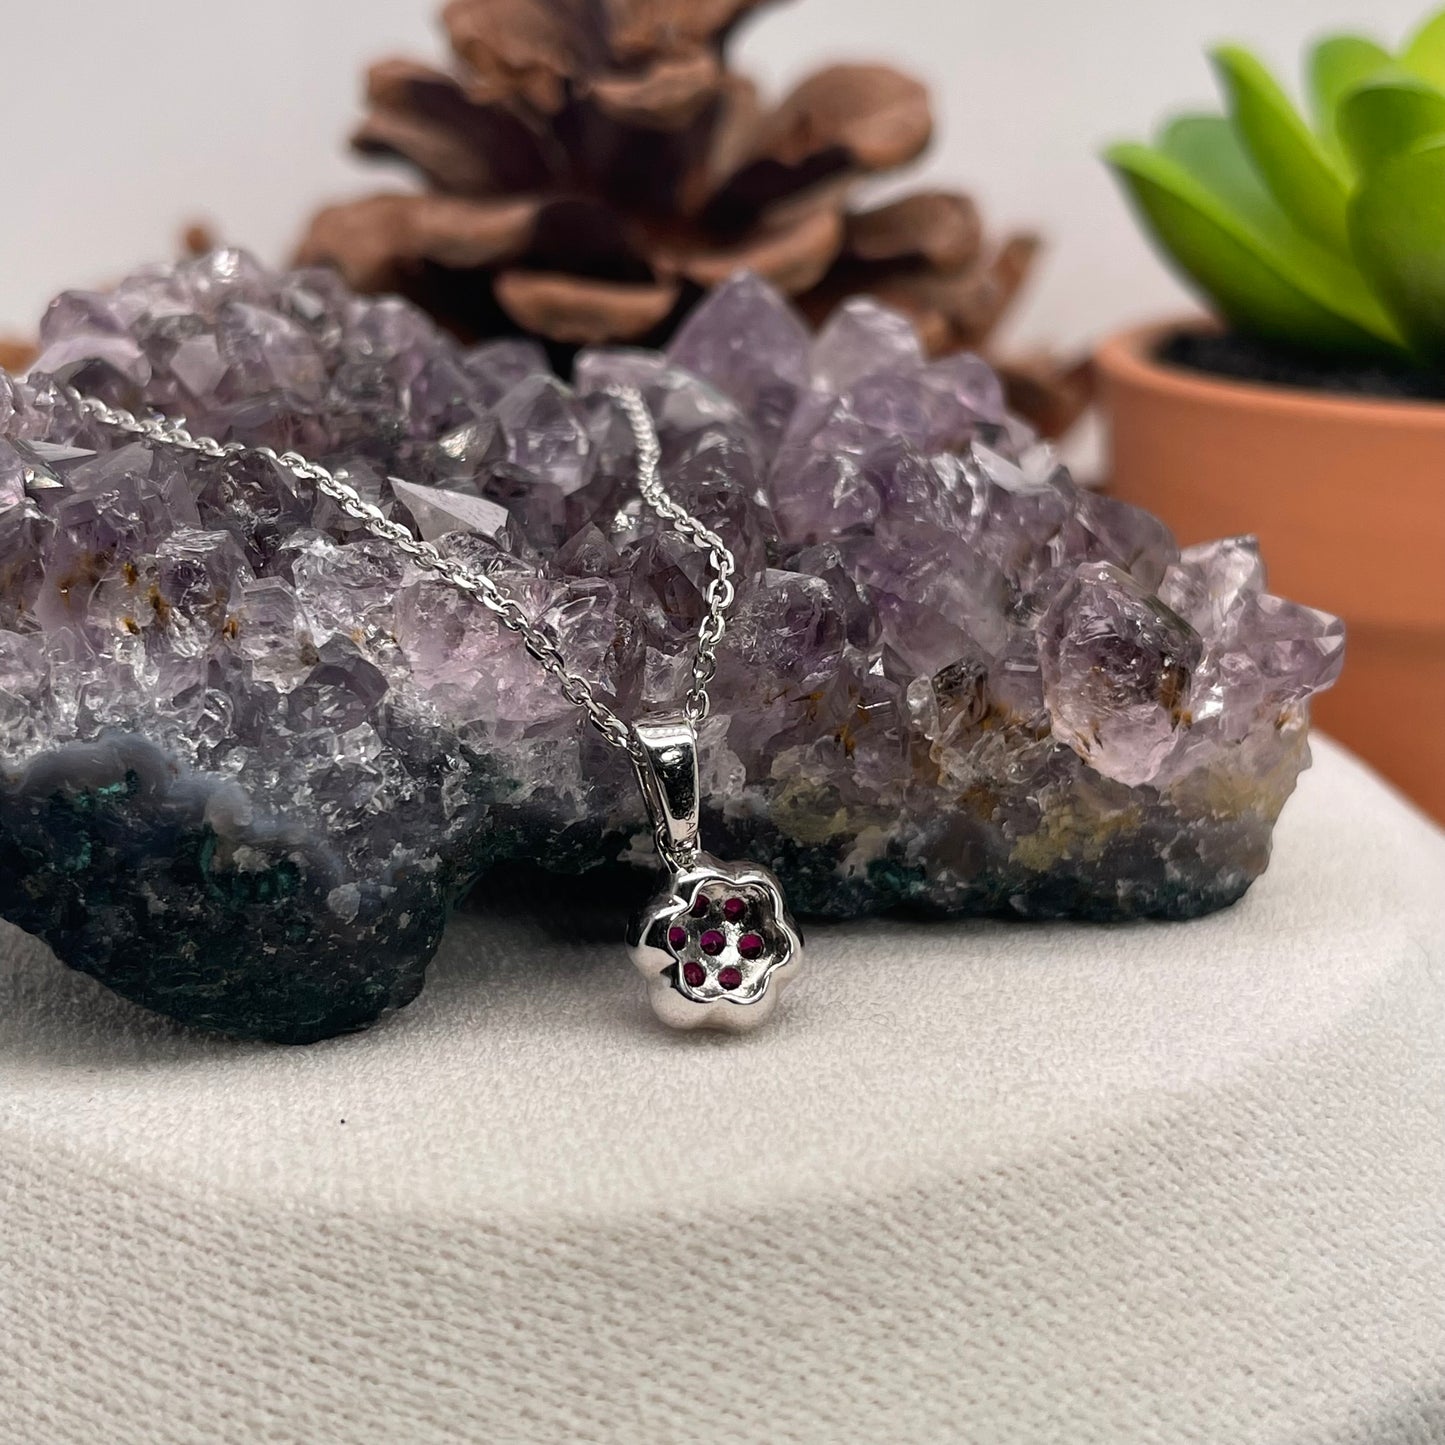 14K White Gold Pink Ruby Pendant with Diamond